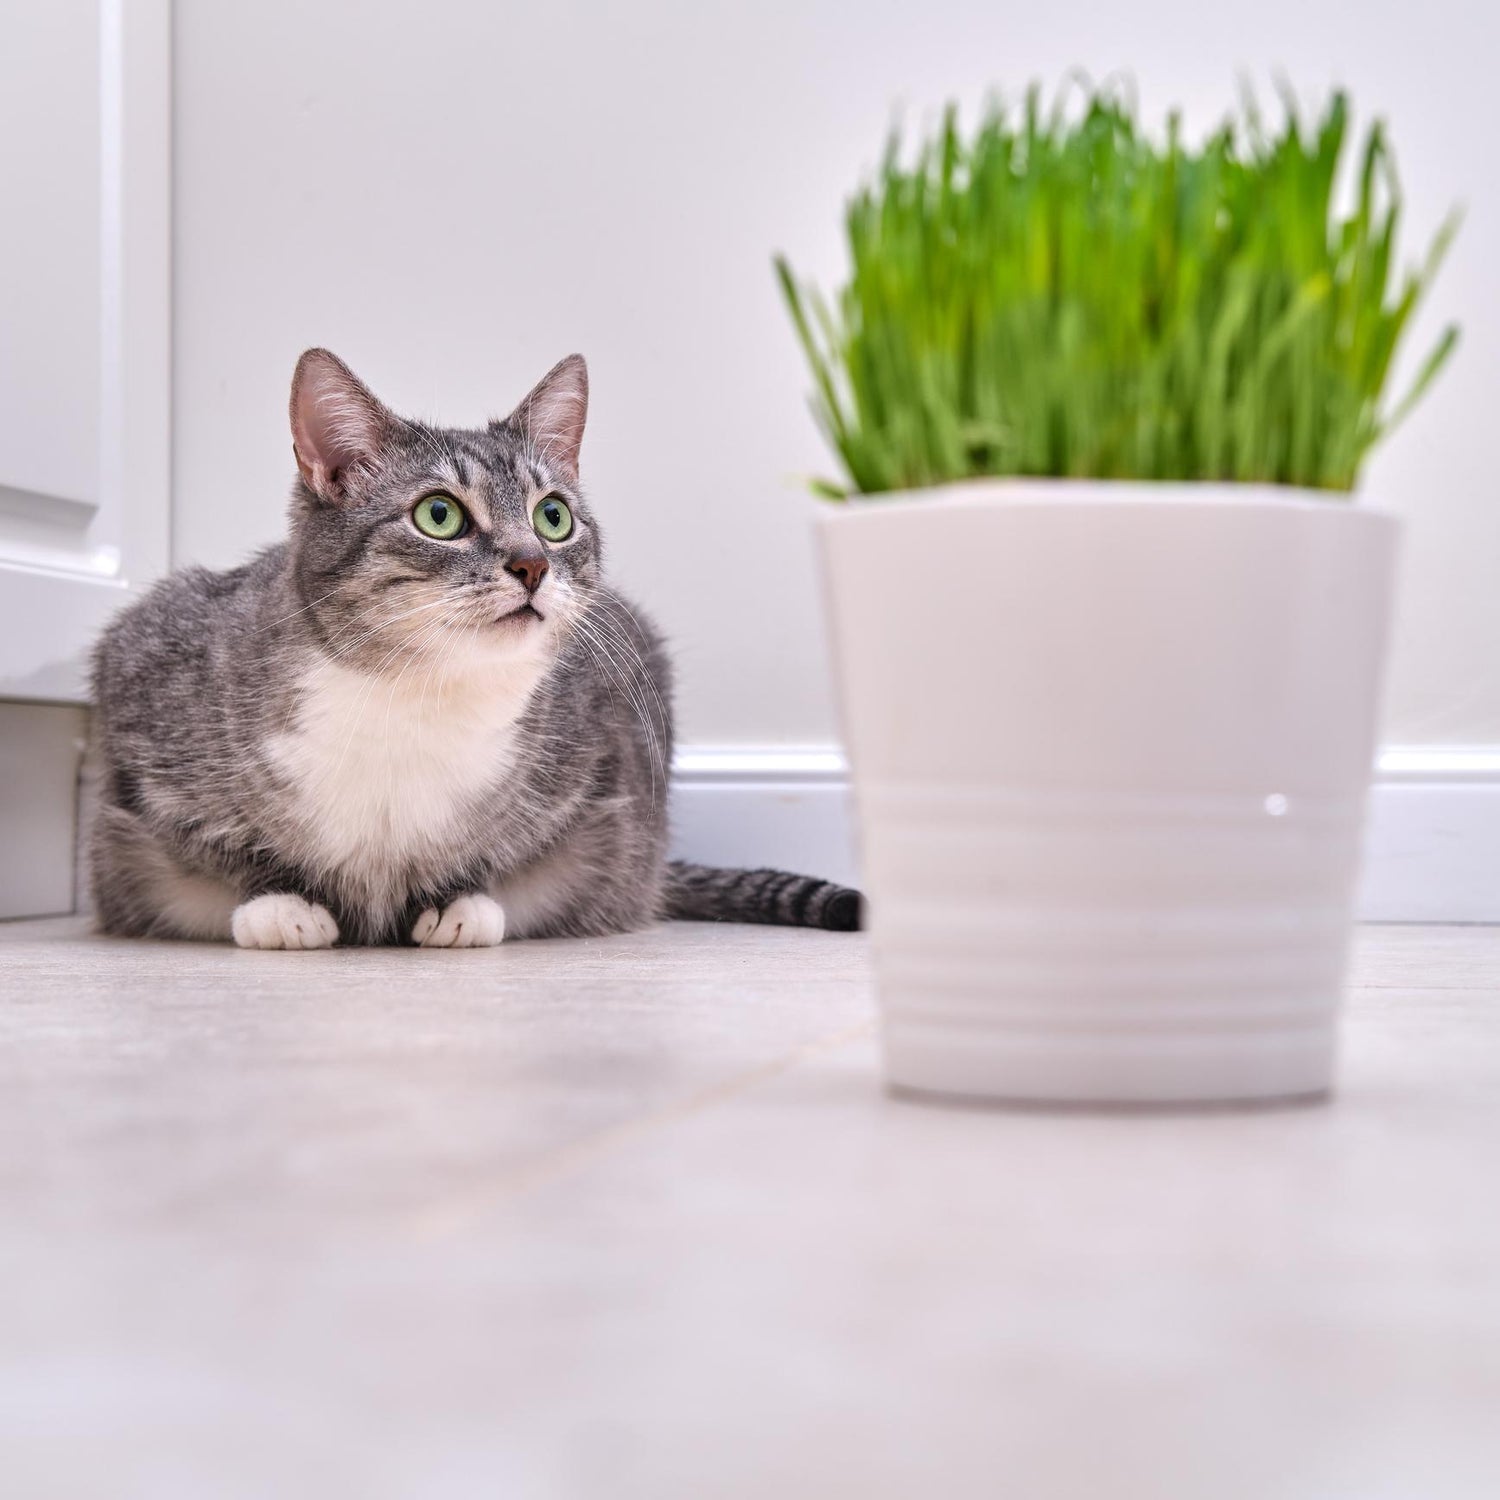 Green Fascination: Why Do Cats Love Chewing on Grass?